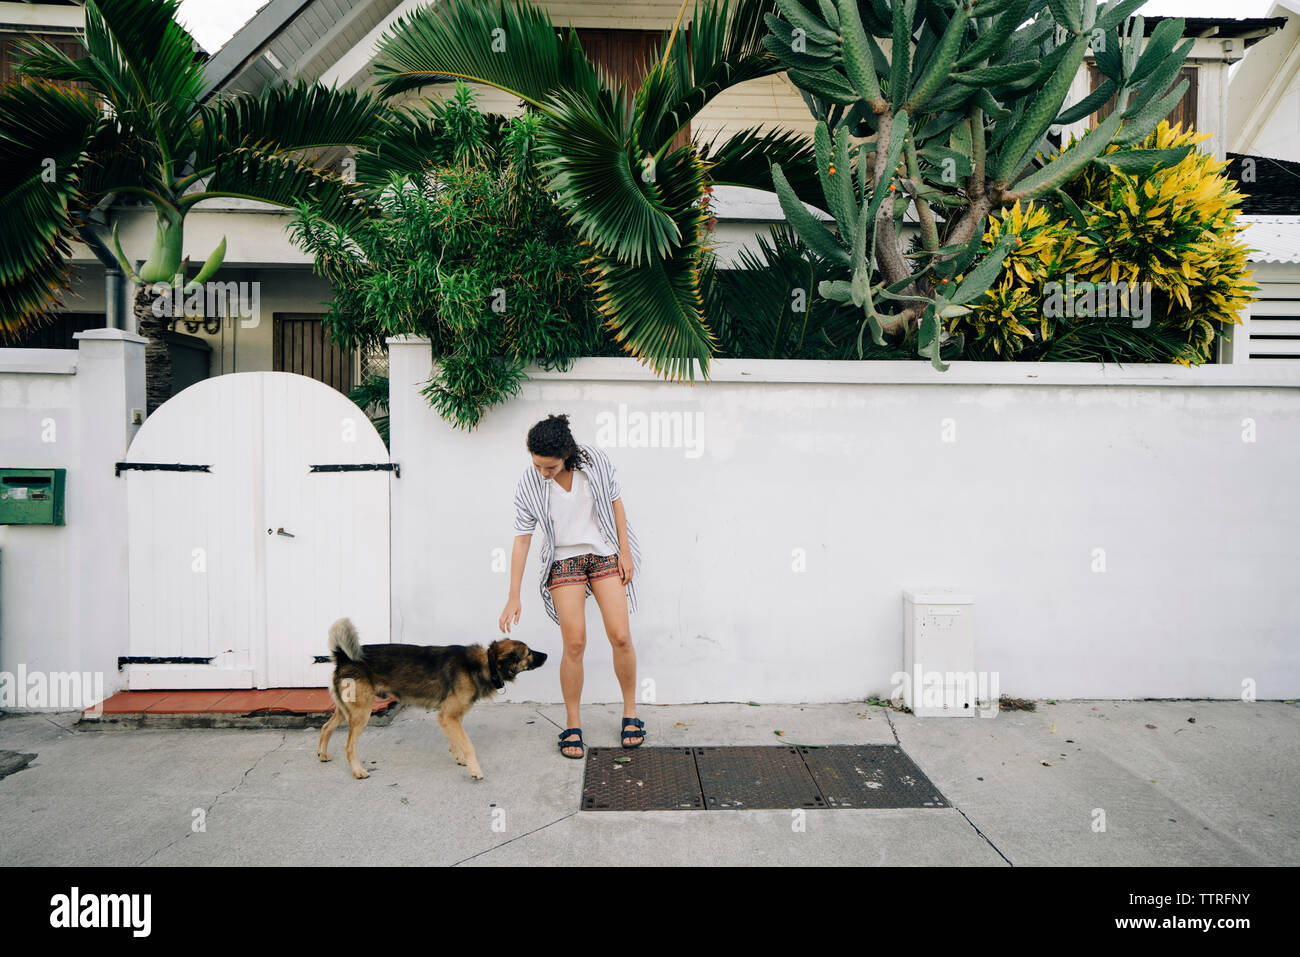 Woman with dog walking on sidewalk Banque D'Images